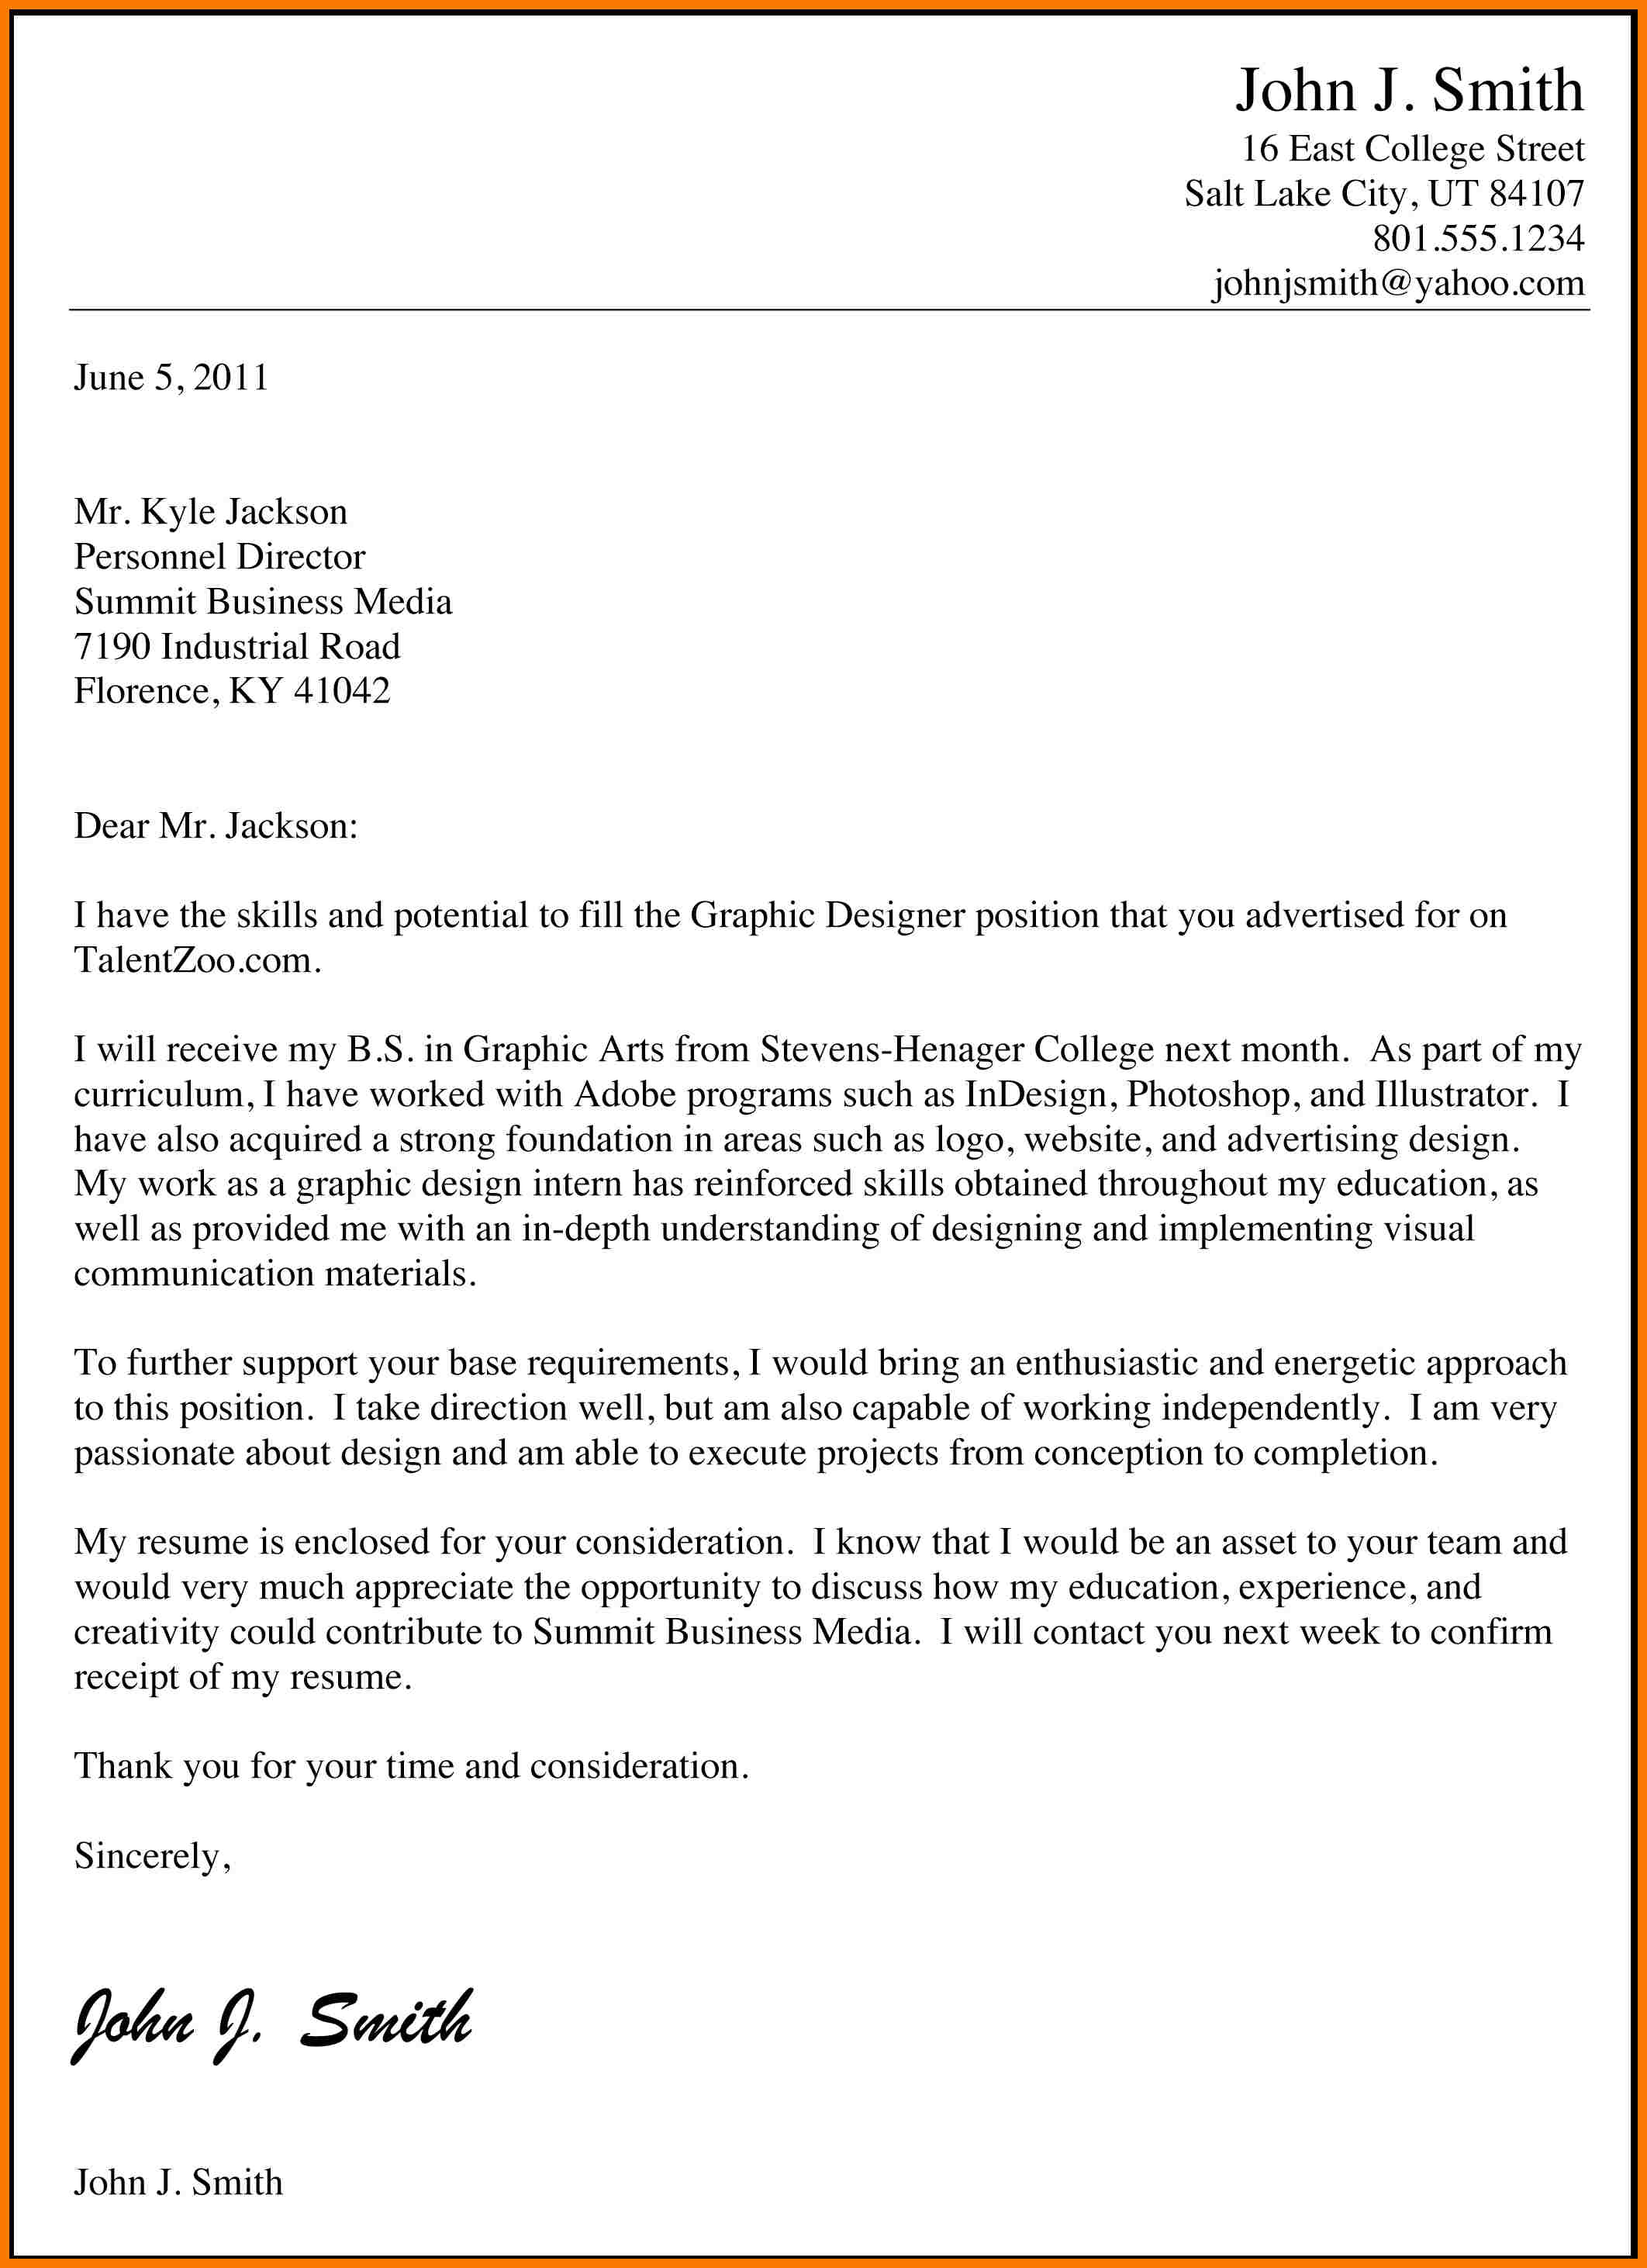 9+ Official Job Application Letter Examples PDF Examples